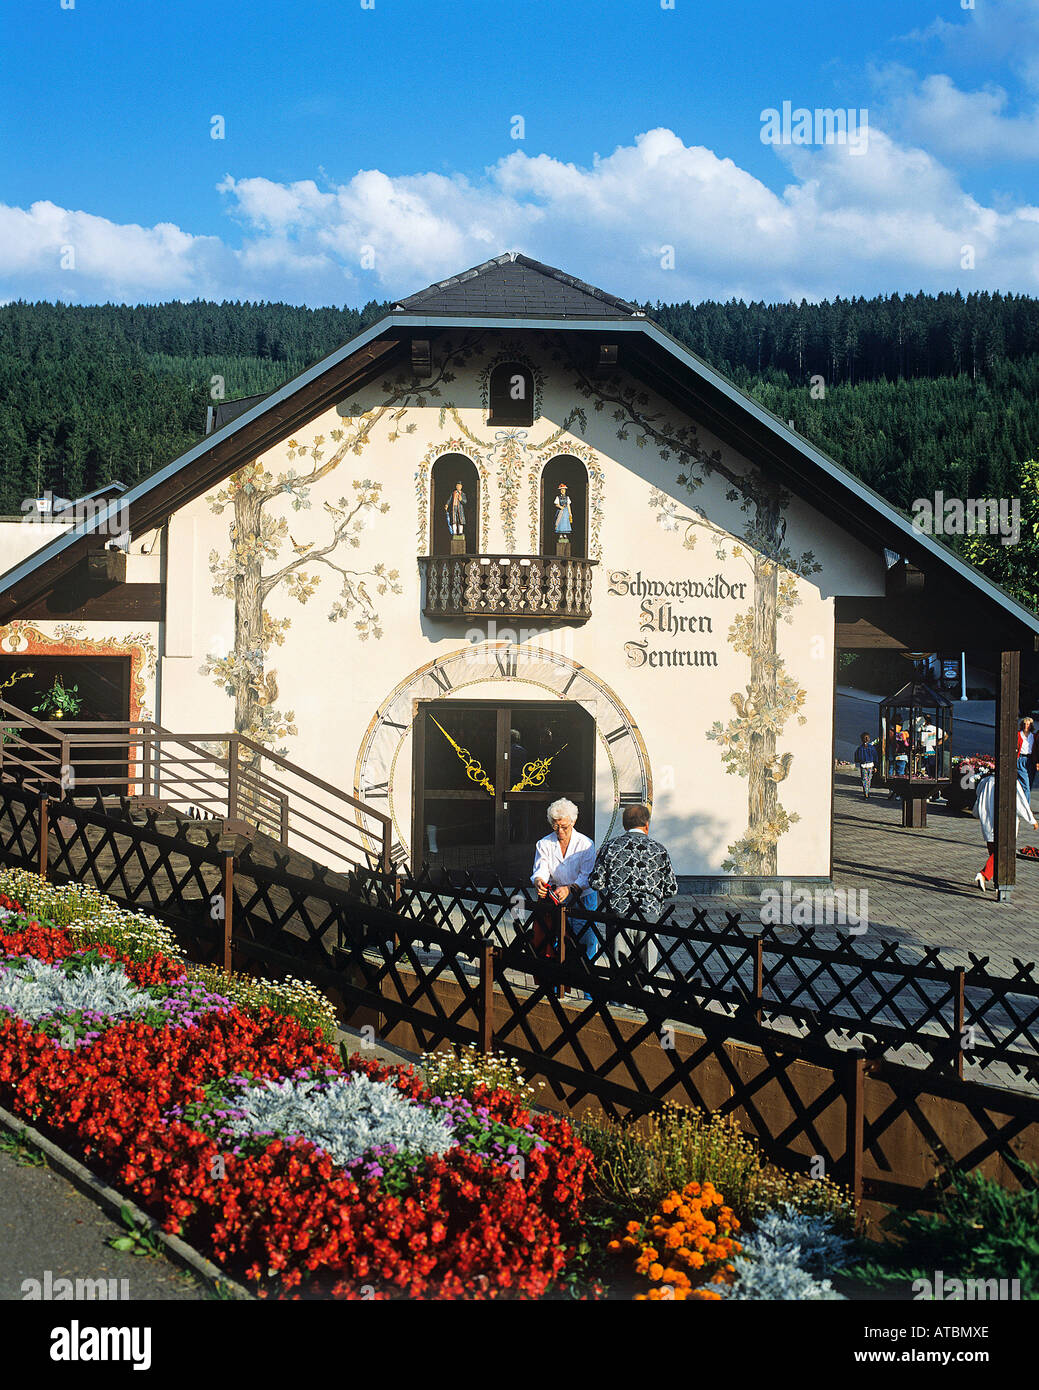 A couple standing beneath a bank of flowers outside a chalet its entire gable forming a huge cuckoo clock in the town of Titisee at the heart of the Schwarzwald Black Forest region in southwestern Germany Stock Photo